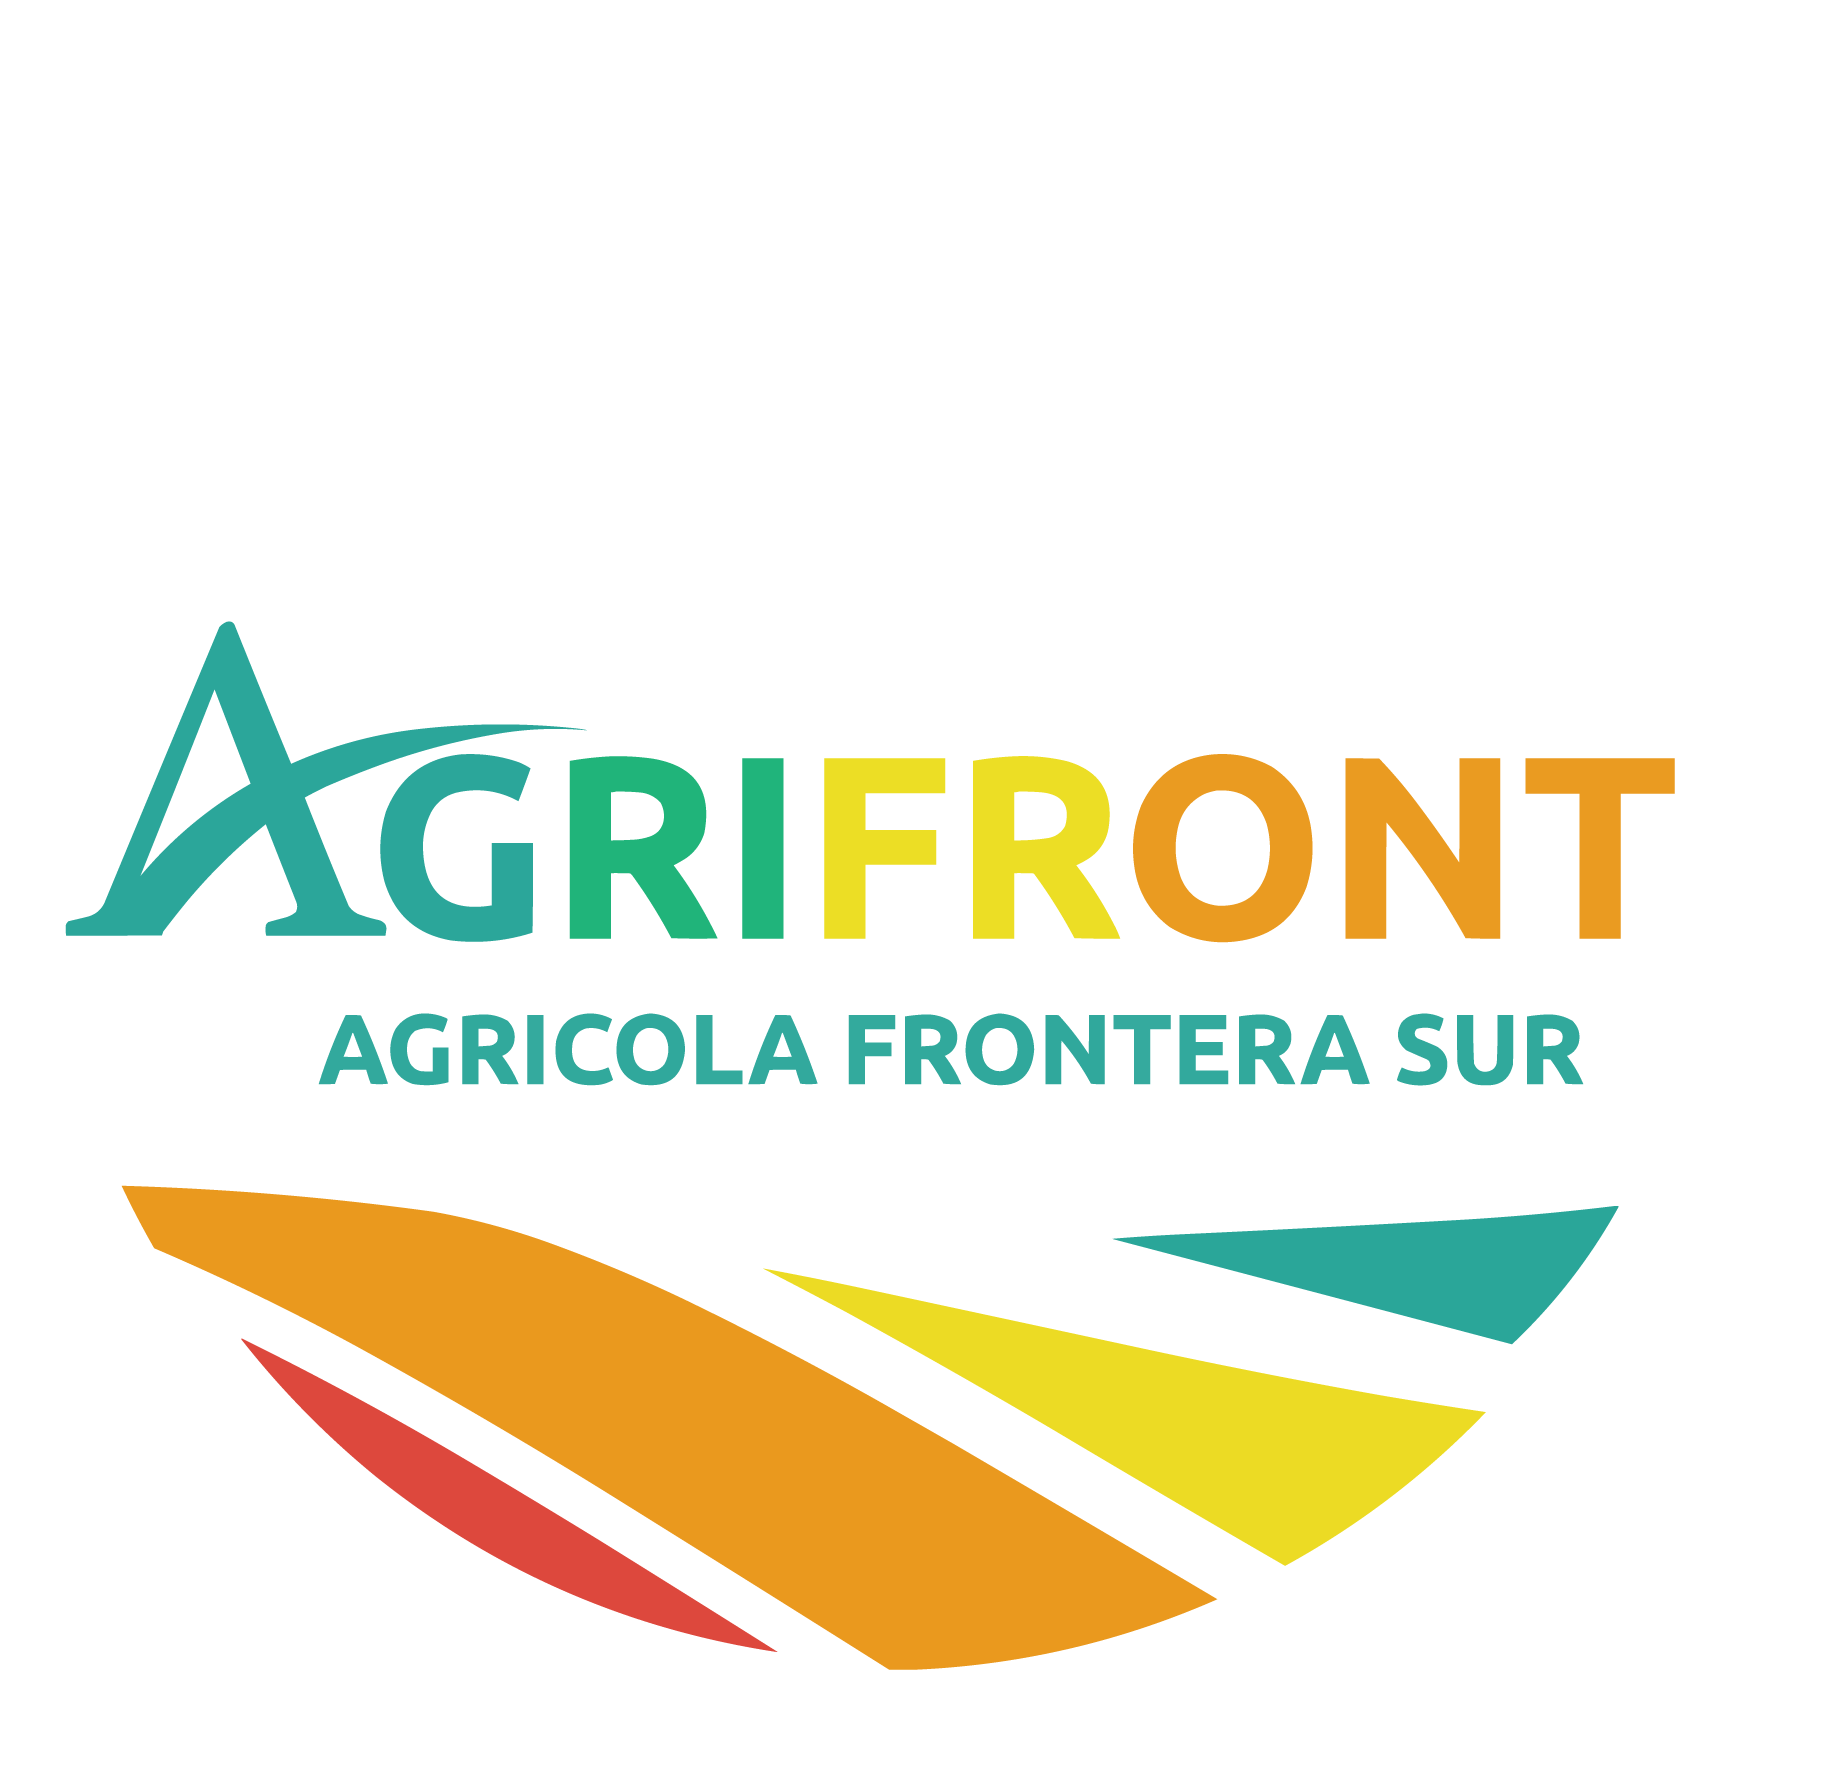 AGRIFRONT